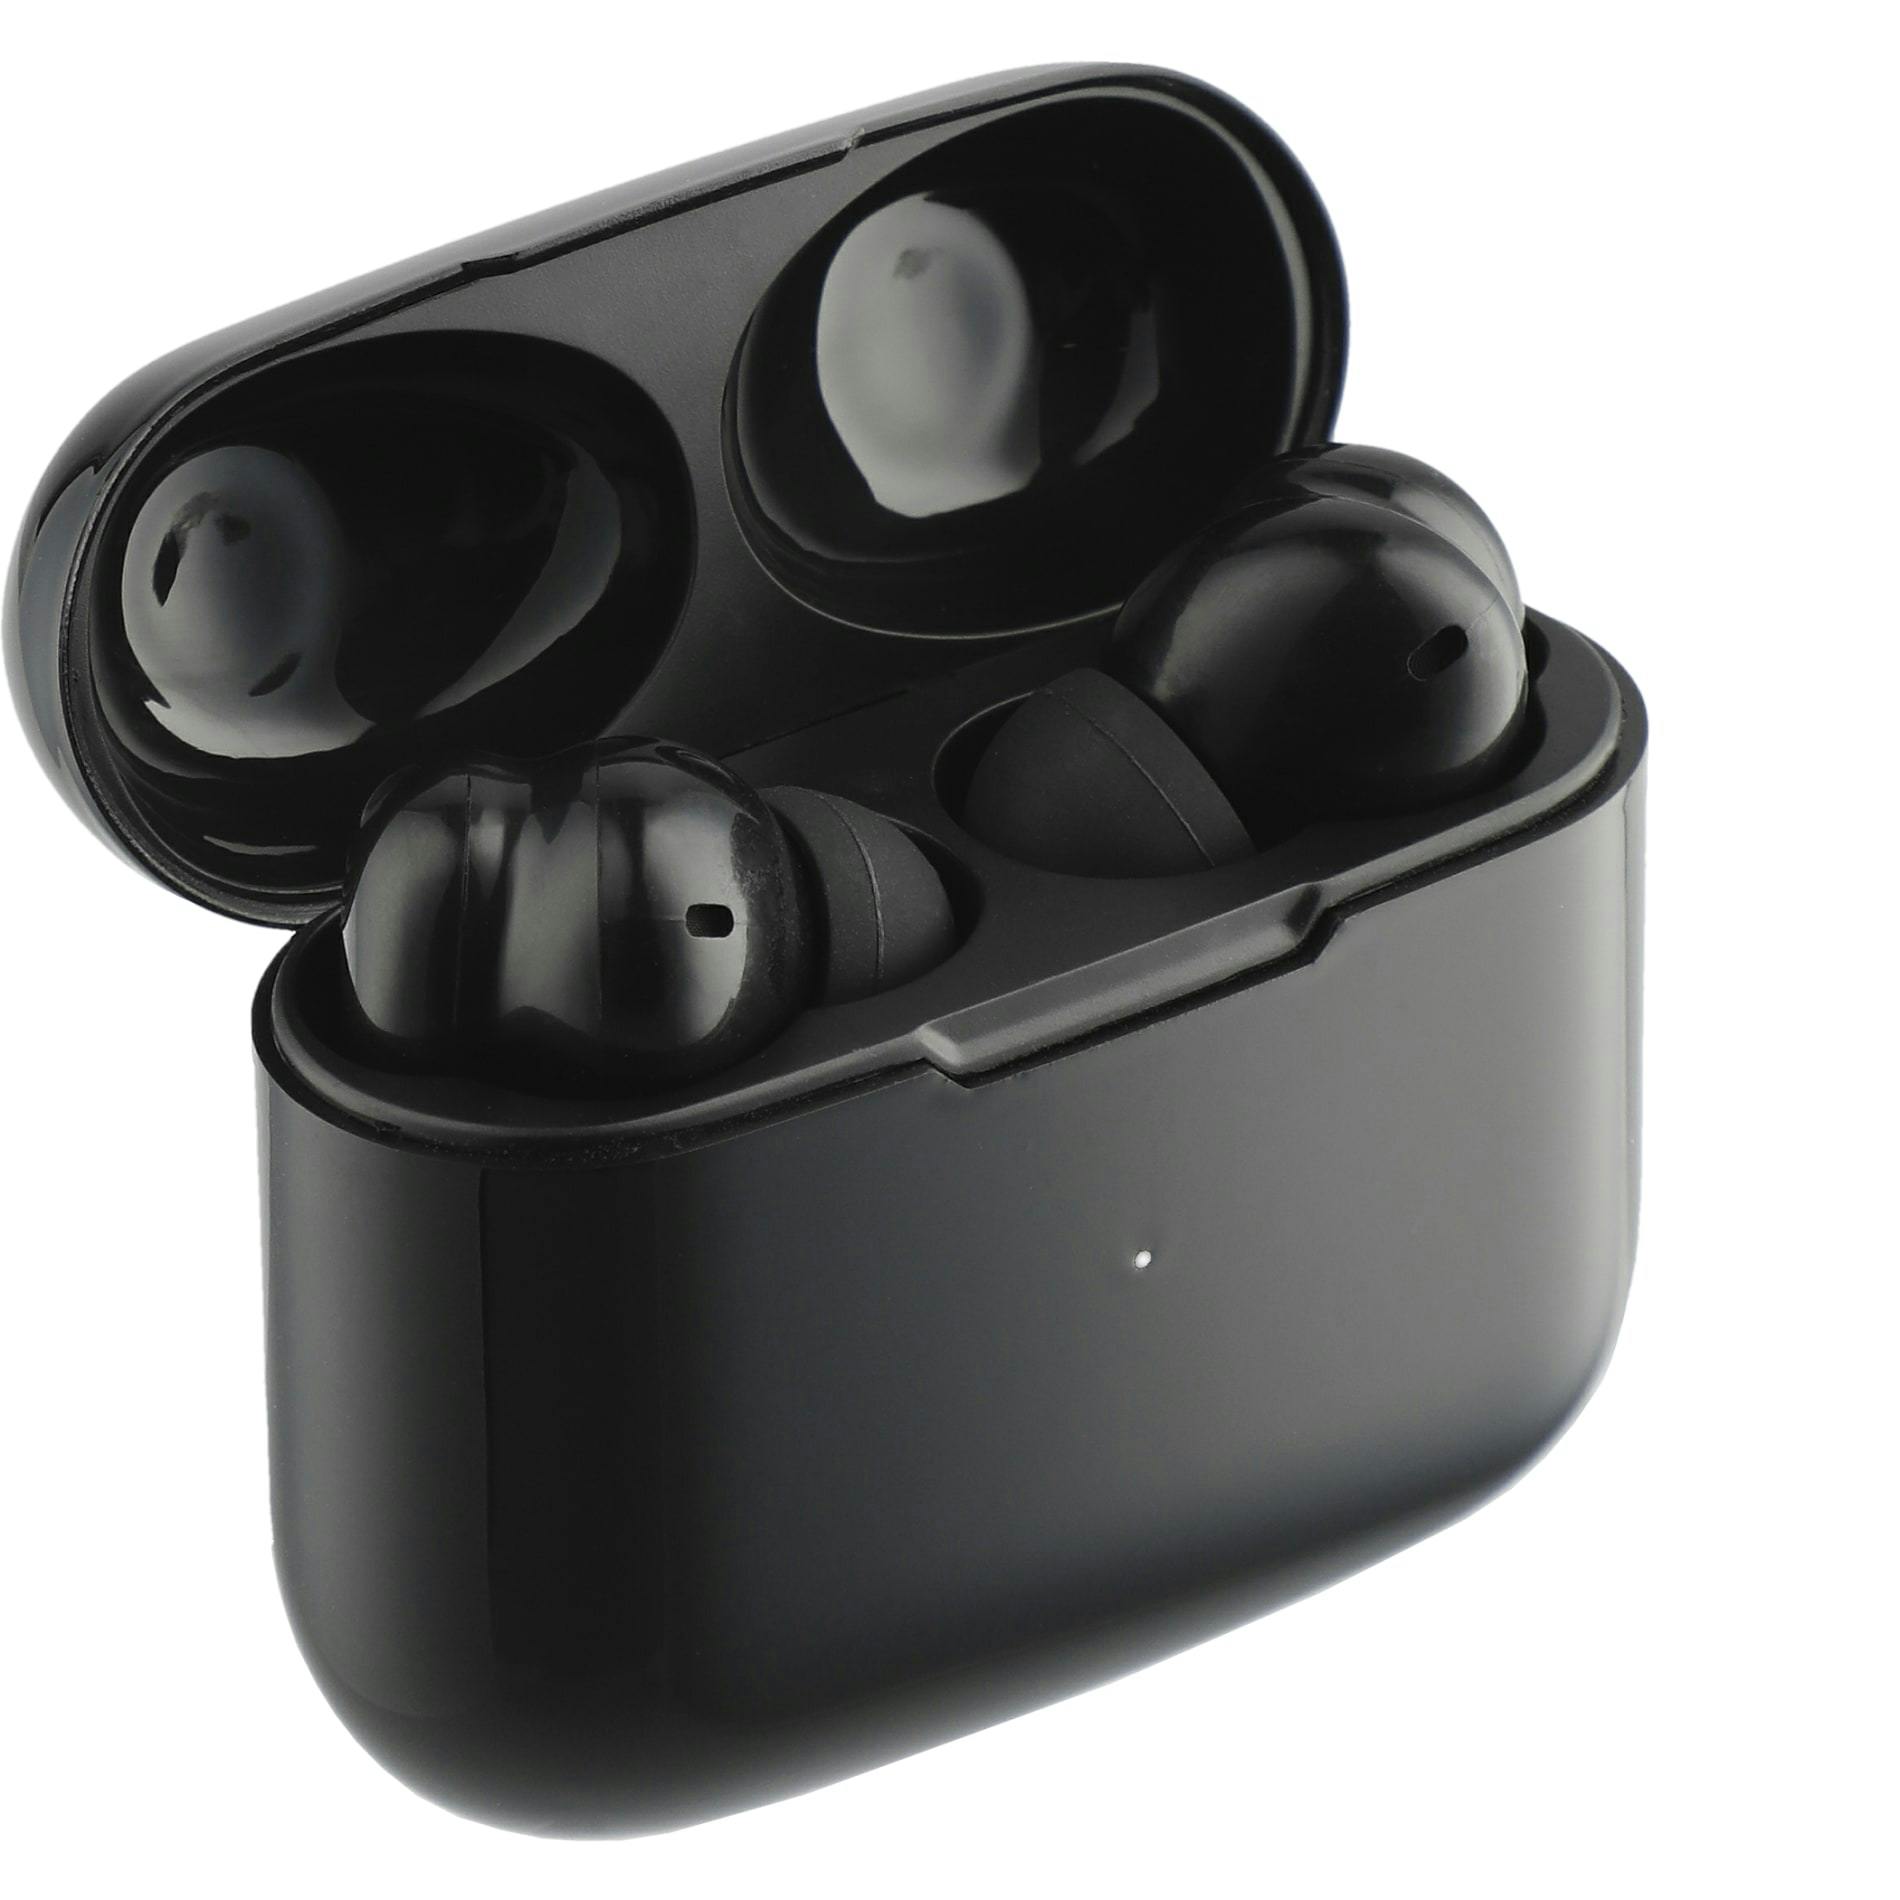 Ifidelity Auto Pair True Wireless Earbuds with ANC - additional Image 4